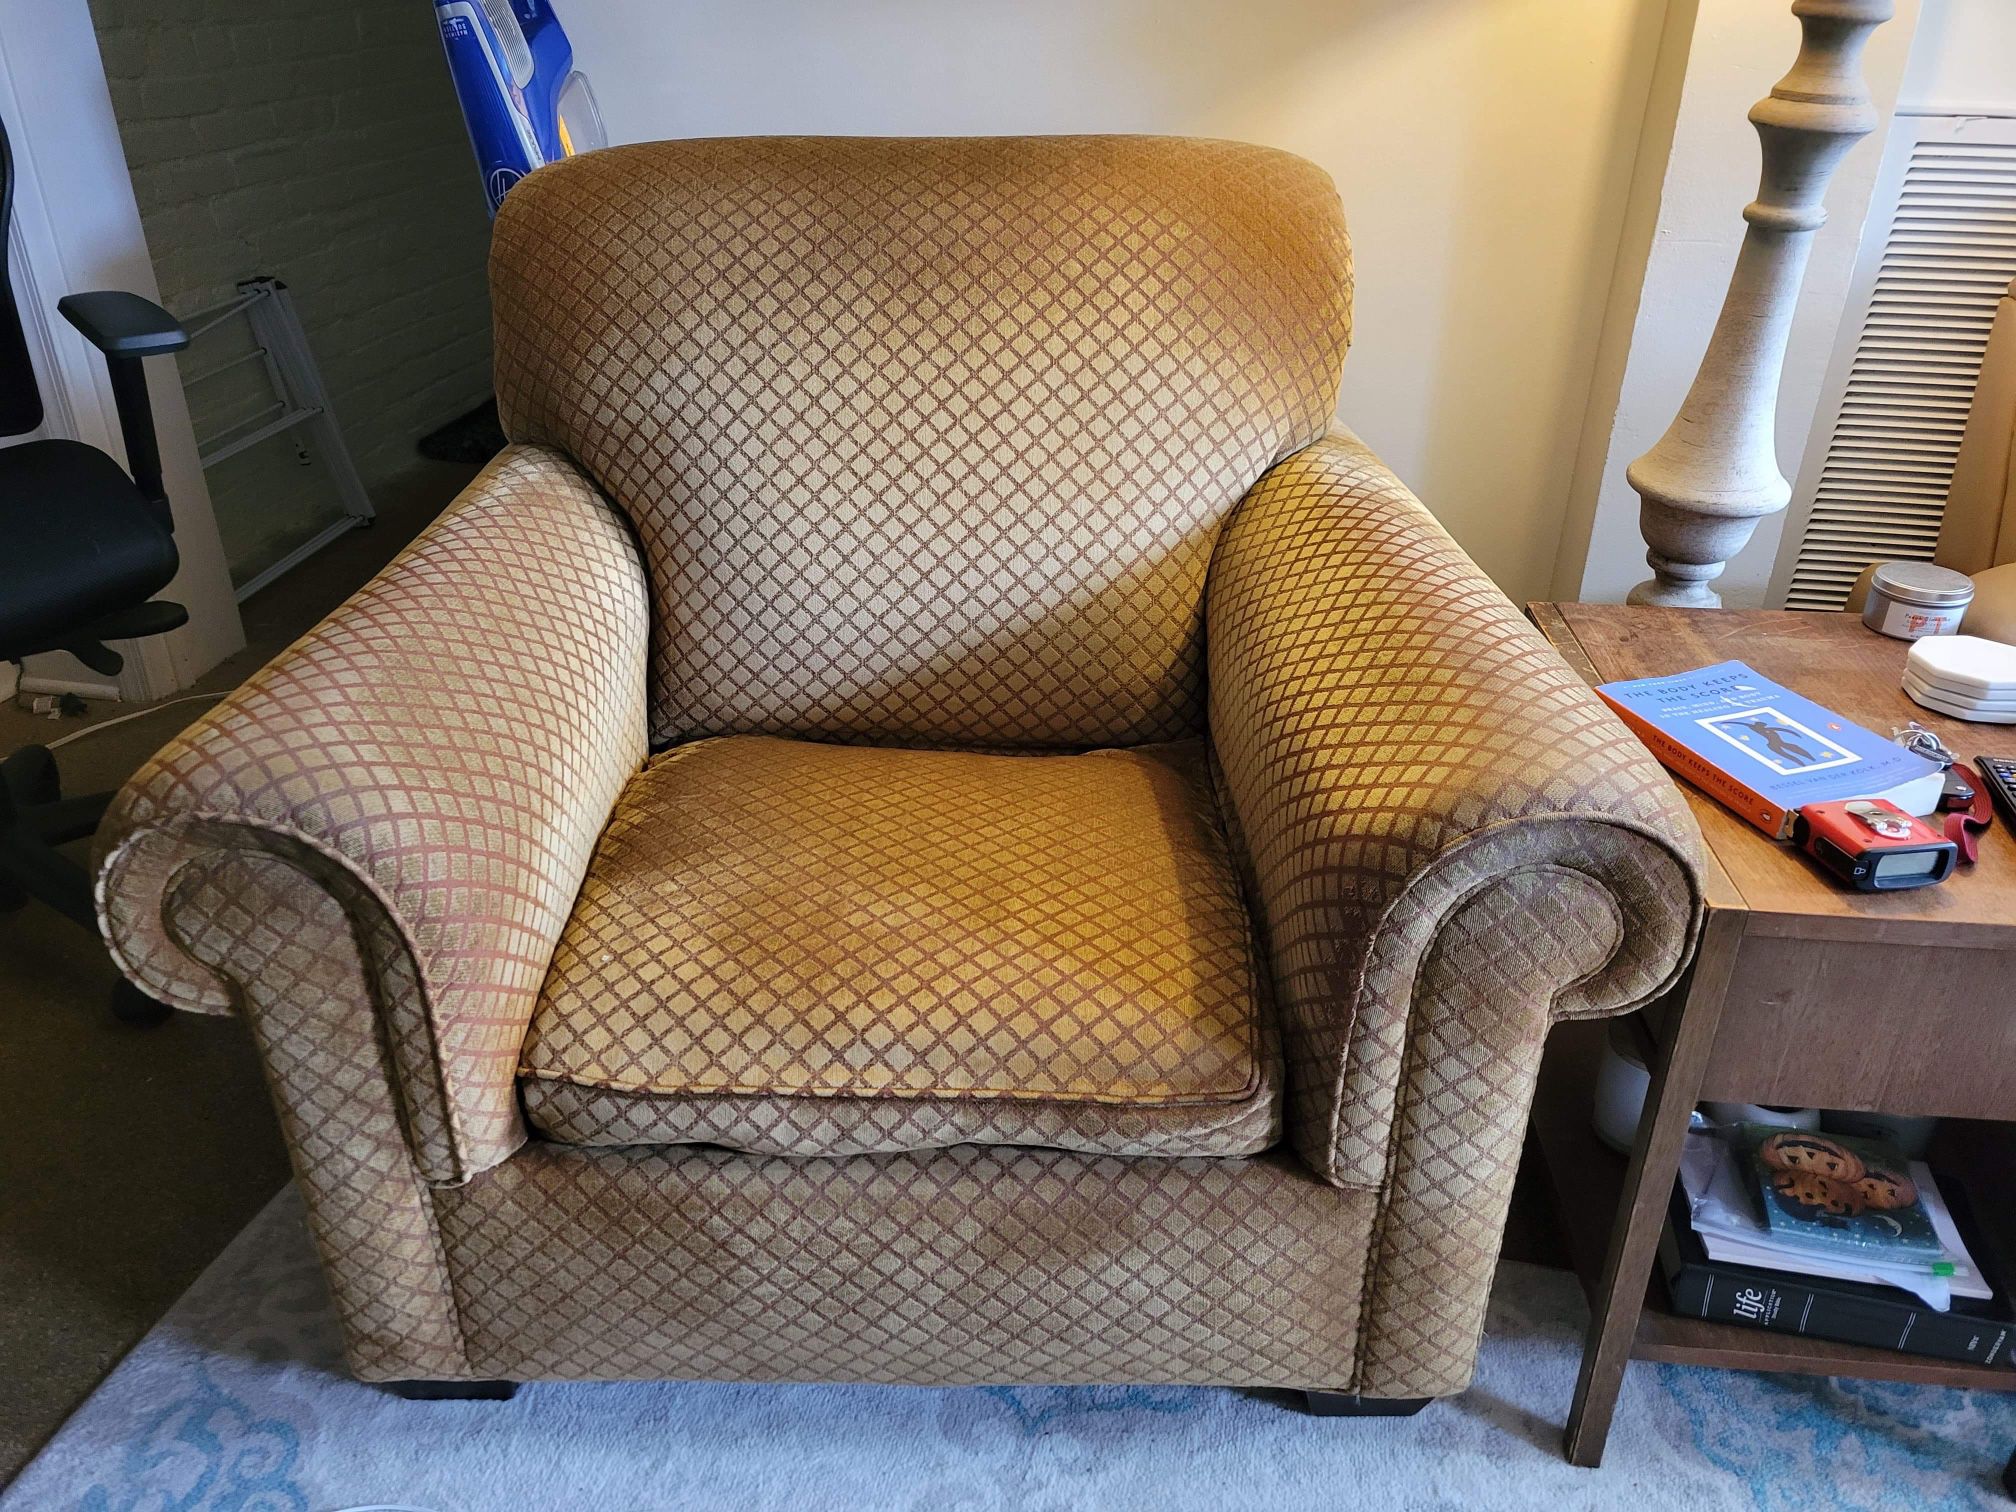 Oversized Armchair - Very Comfy